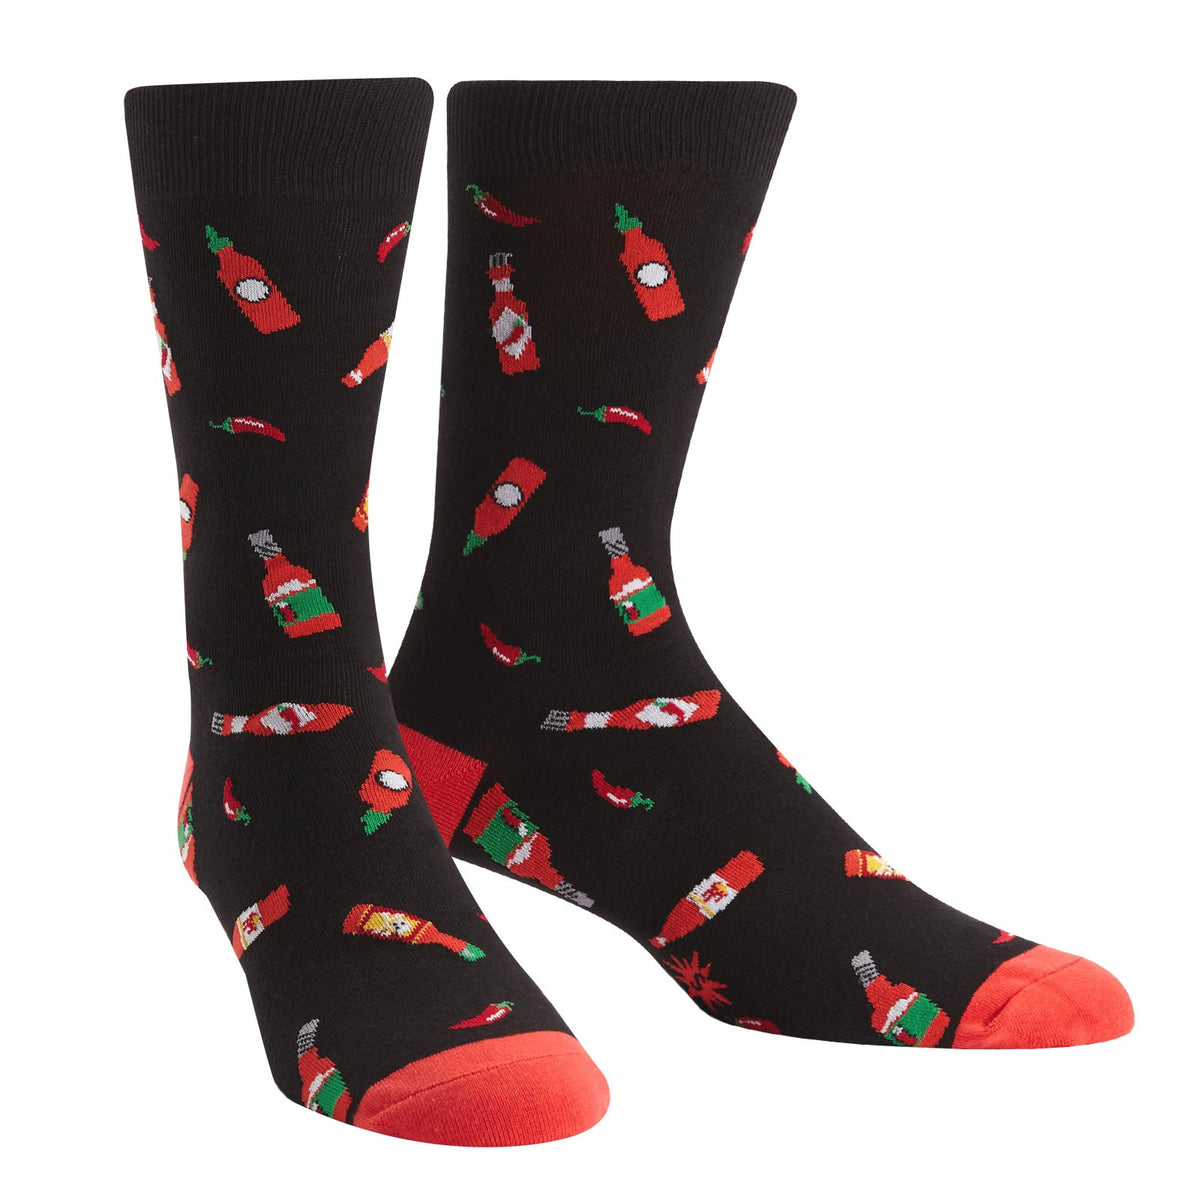 Hot sauce bottles and spicy chilis on men&#39;s socks gives a new definition to the phrase “hot foot”!